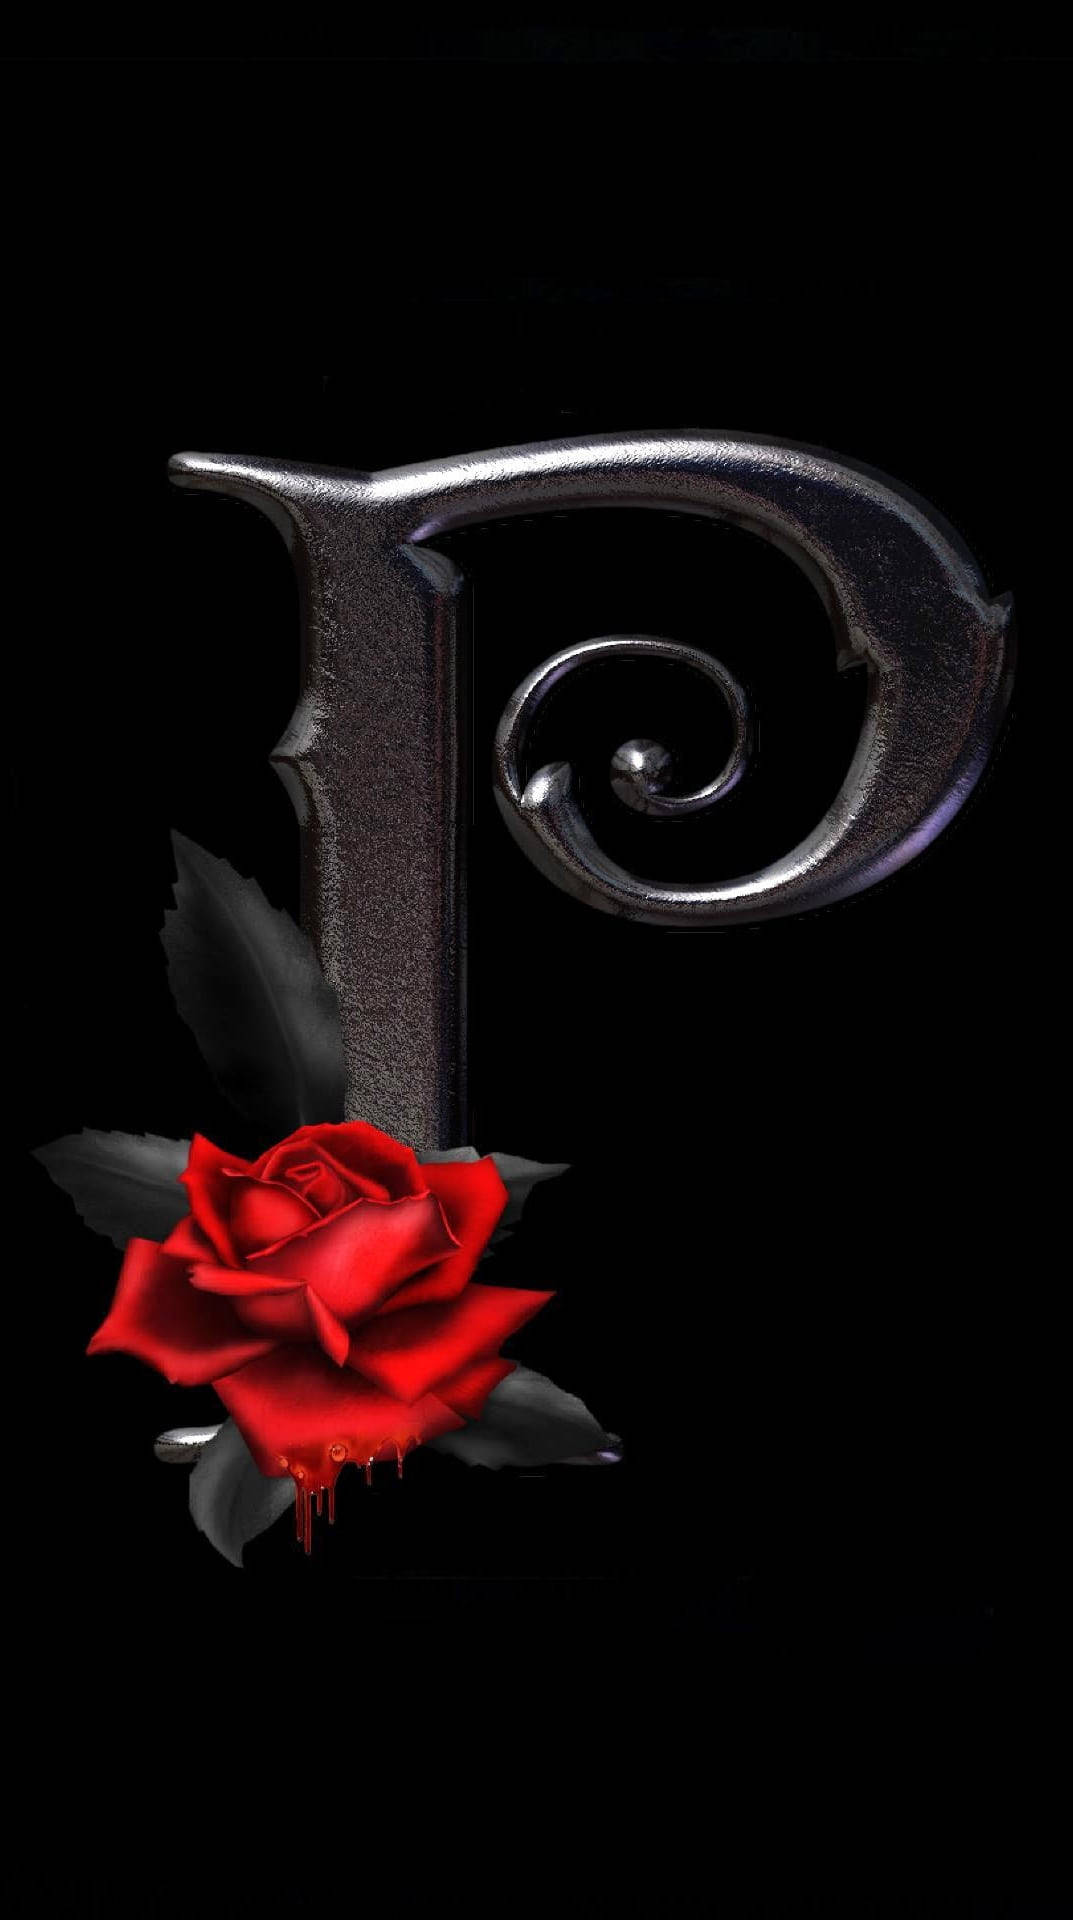 Metallic P Letter With Rose Background